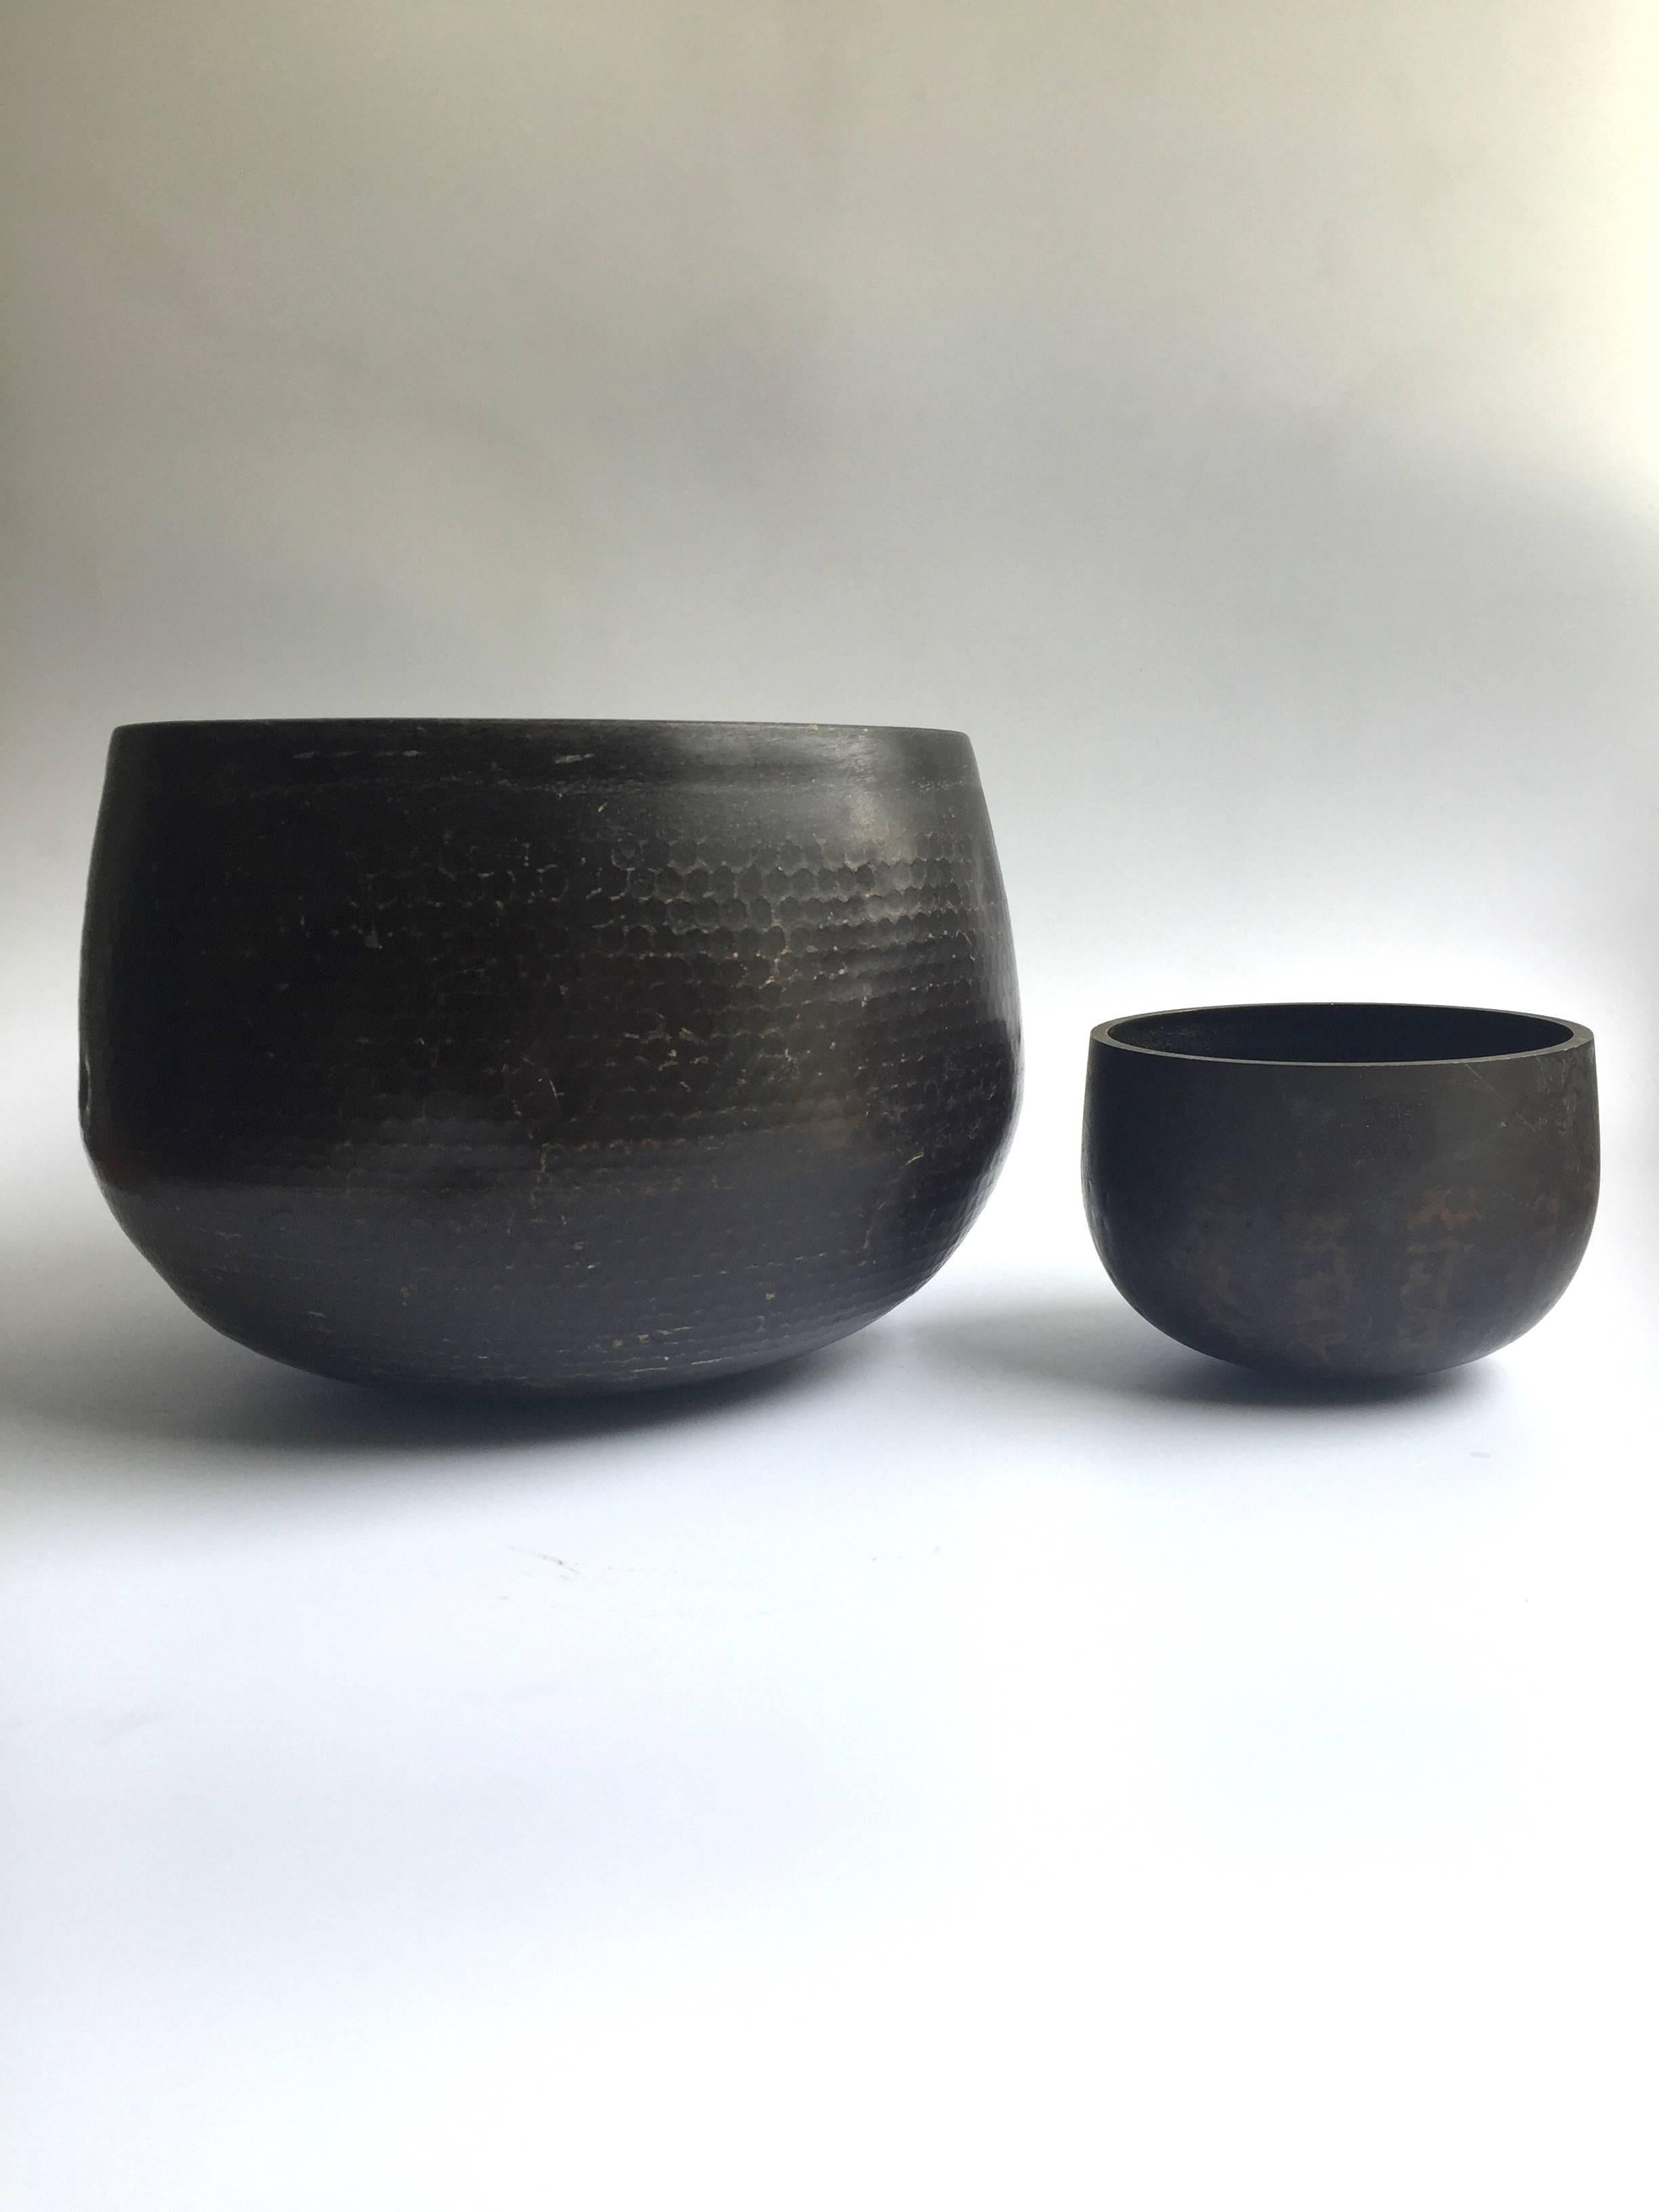 This is a set of substantial antique Japanese singing bowls.

The material is solid bronze. All patina is original. This bowl makes the most beautiful, enlightening, deep sound that is at once soothing and thought provoking.

The Japanese singing